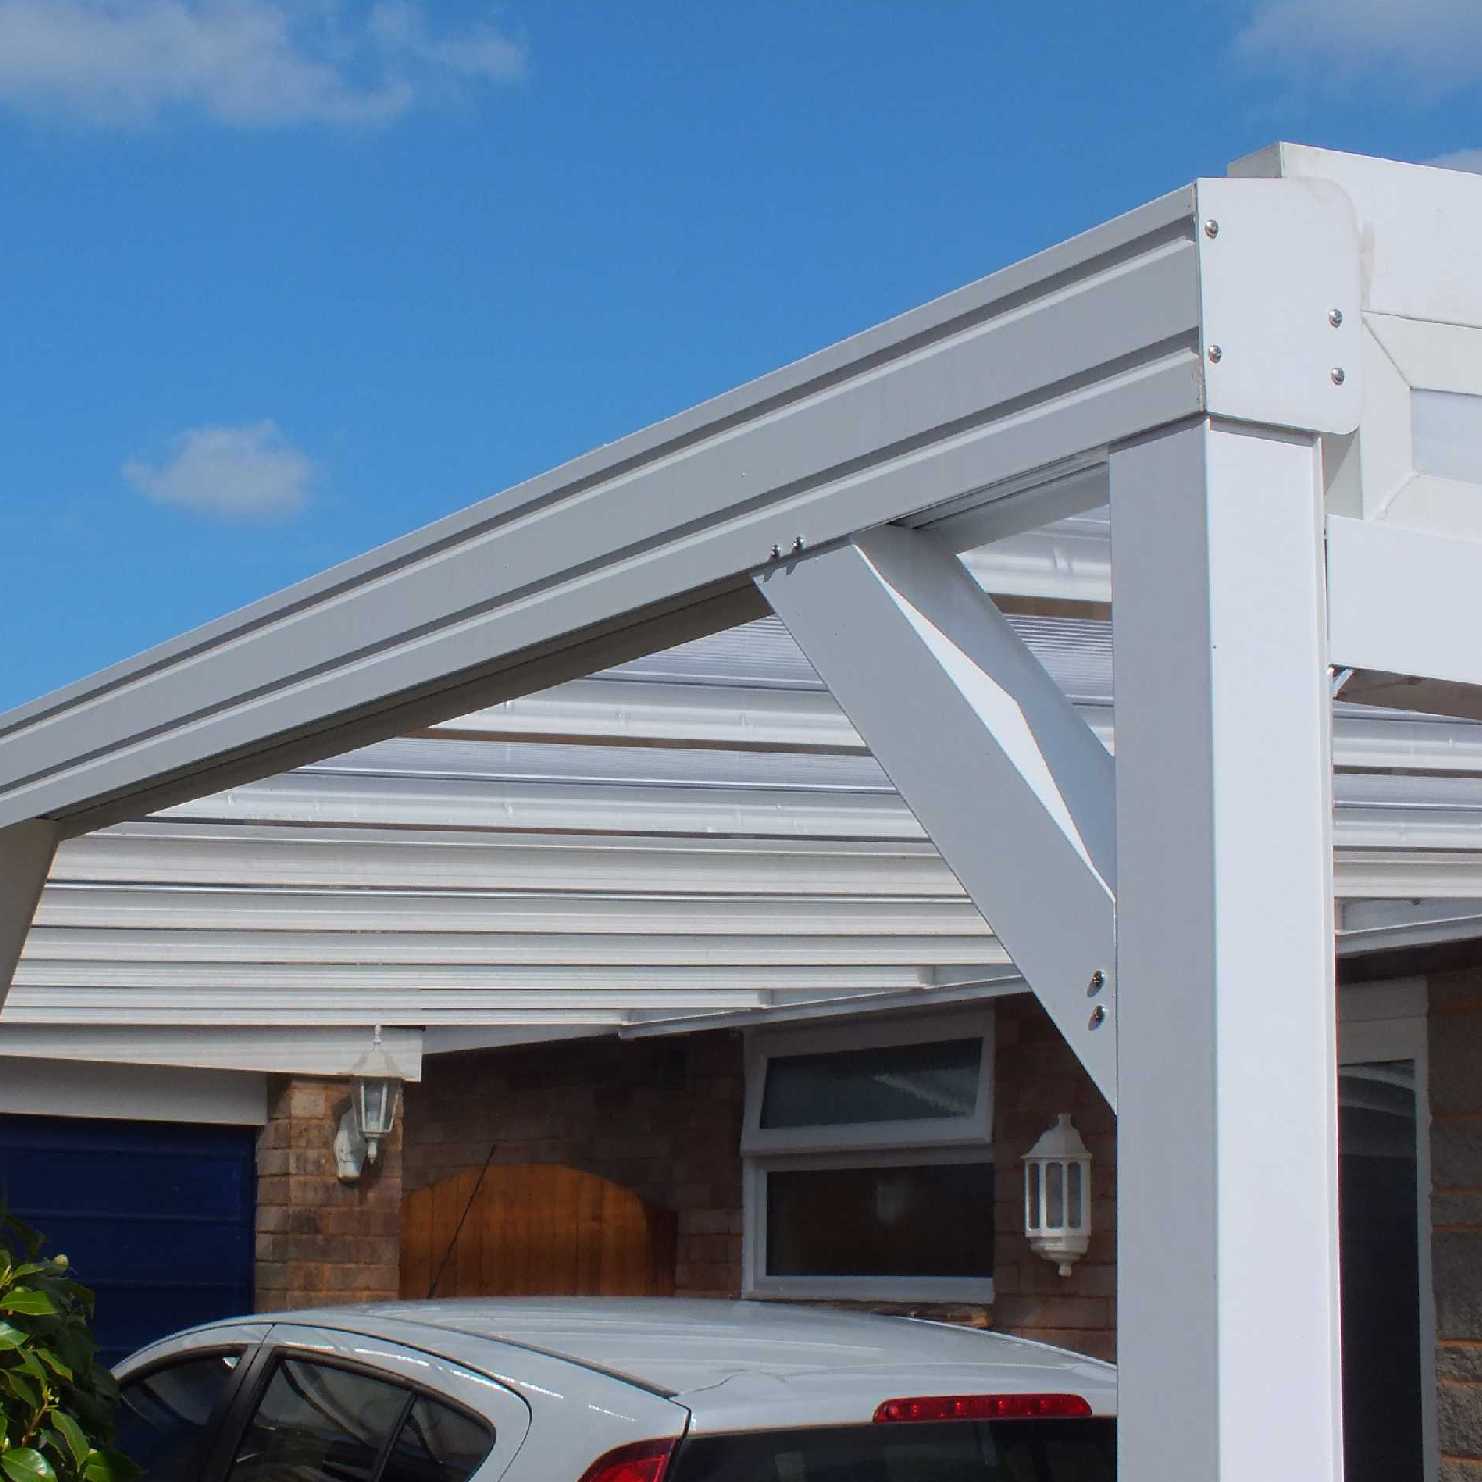 Great deals on Omega Smart Lean-To Canopy, White with 16mm Polycarbonate Glazing - 8.4m (W) x 2.5m (P), (4) Supporting Posts